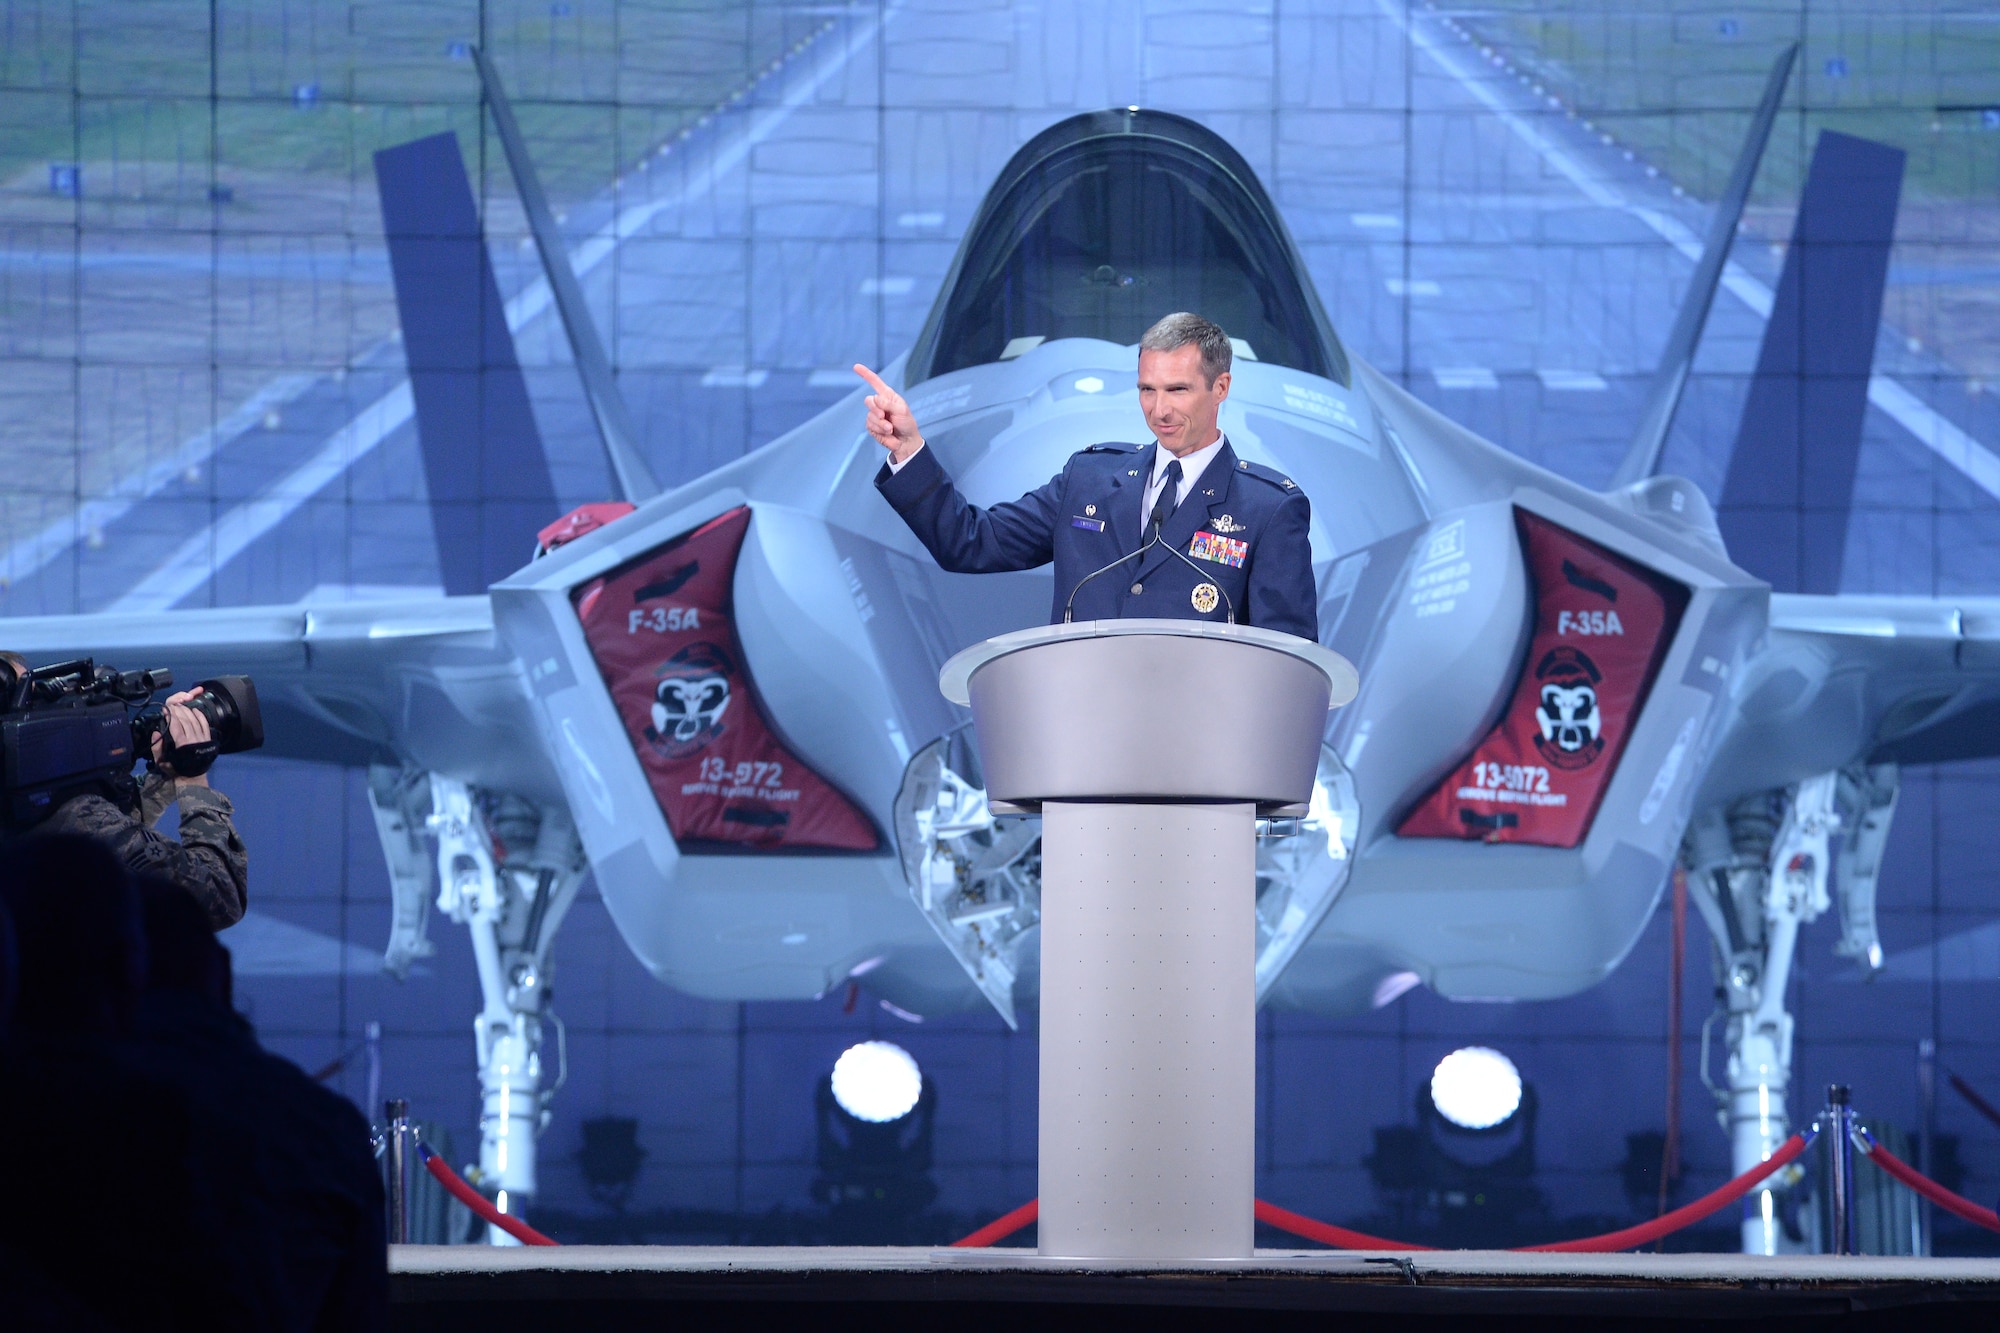 Col. Bryan Radliff, 419th Fighter Wing commander, speaks to Airmen, Air Force leaders, Utah elected officials, and members of the local community during the F-35 arrival ceremony at Hill Air Force Base, Utah, Oct. 14. The ceremony, hosted by Lockheed Martin, marked the beginning of F-35 operations at the 419th FW alongside its active-duty counterparts in the 388th FW. (U.S. Air Force photo/R. Nial Bradshaw)